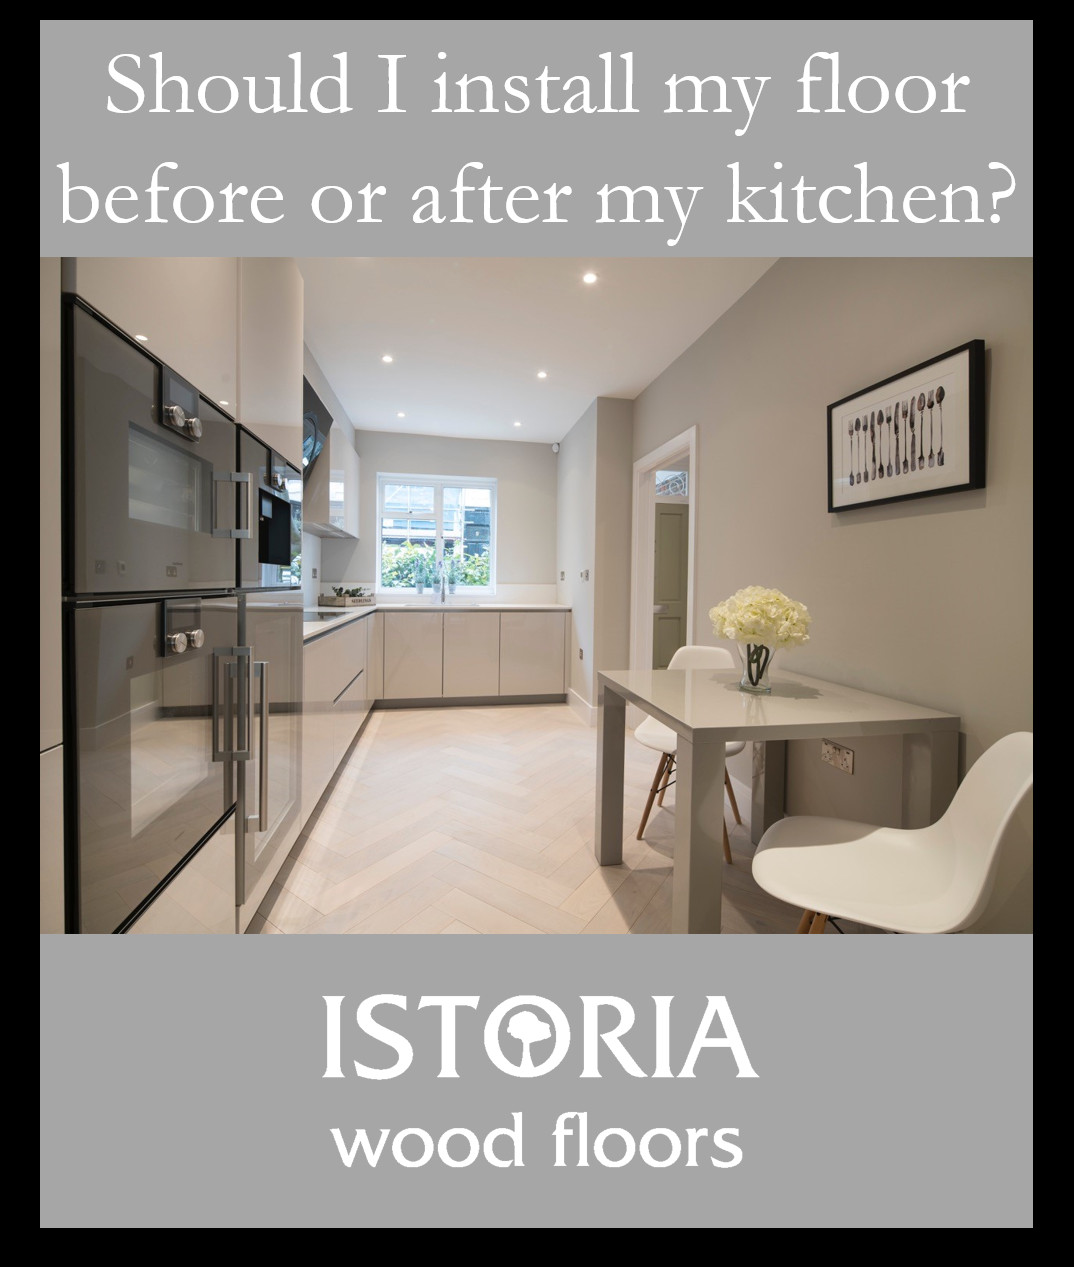 20 Cute Hardwood Flooring Questions 2024 free download hardwood flooring questions of should i install my floor before or after my kitchen you can throughout learn the answers to the most frequently asked questions about wood flooring this inclu